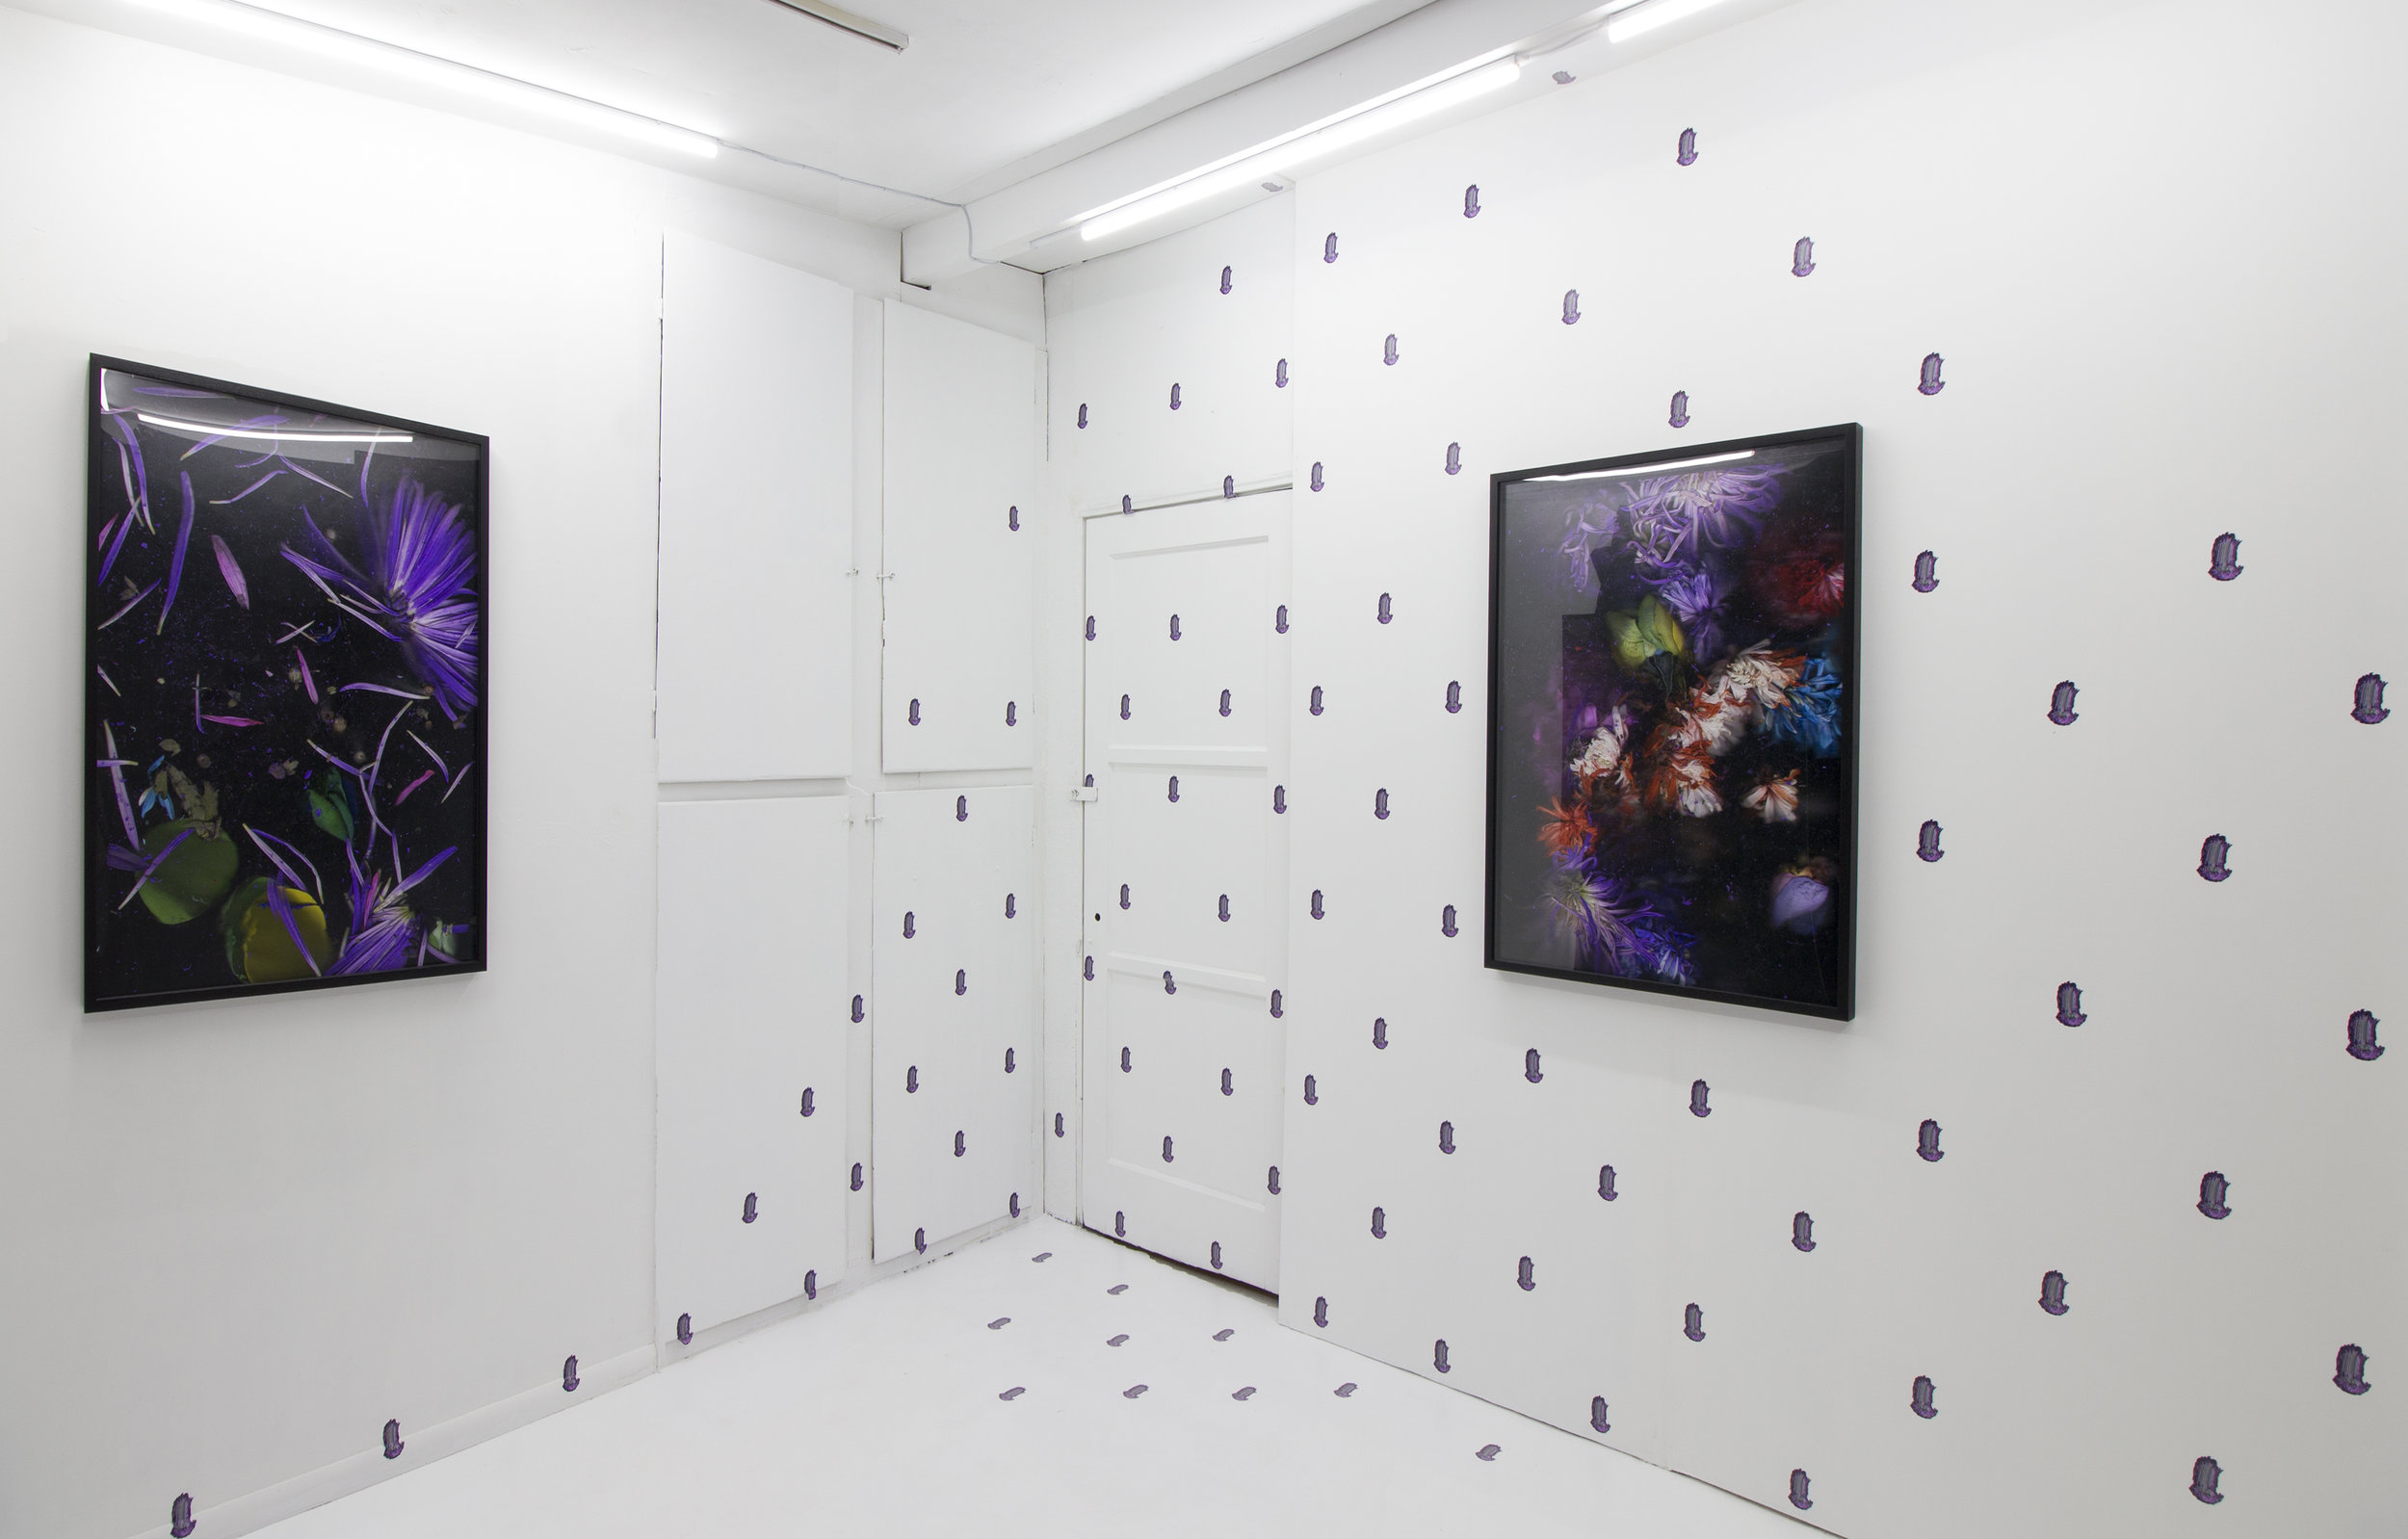  Quick and Endless, 2018Silver halide archival print, artist frames, wall vinyl  Installation view: "Quick and Endless" at off-site  Ochi Projects , Los Angeles CA 